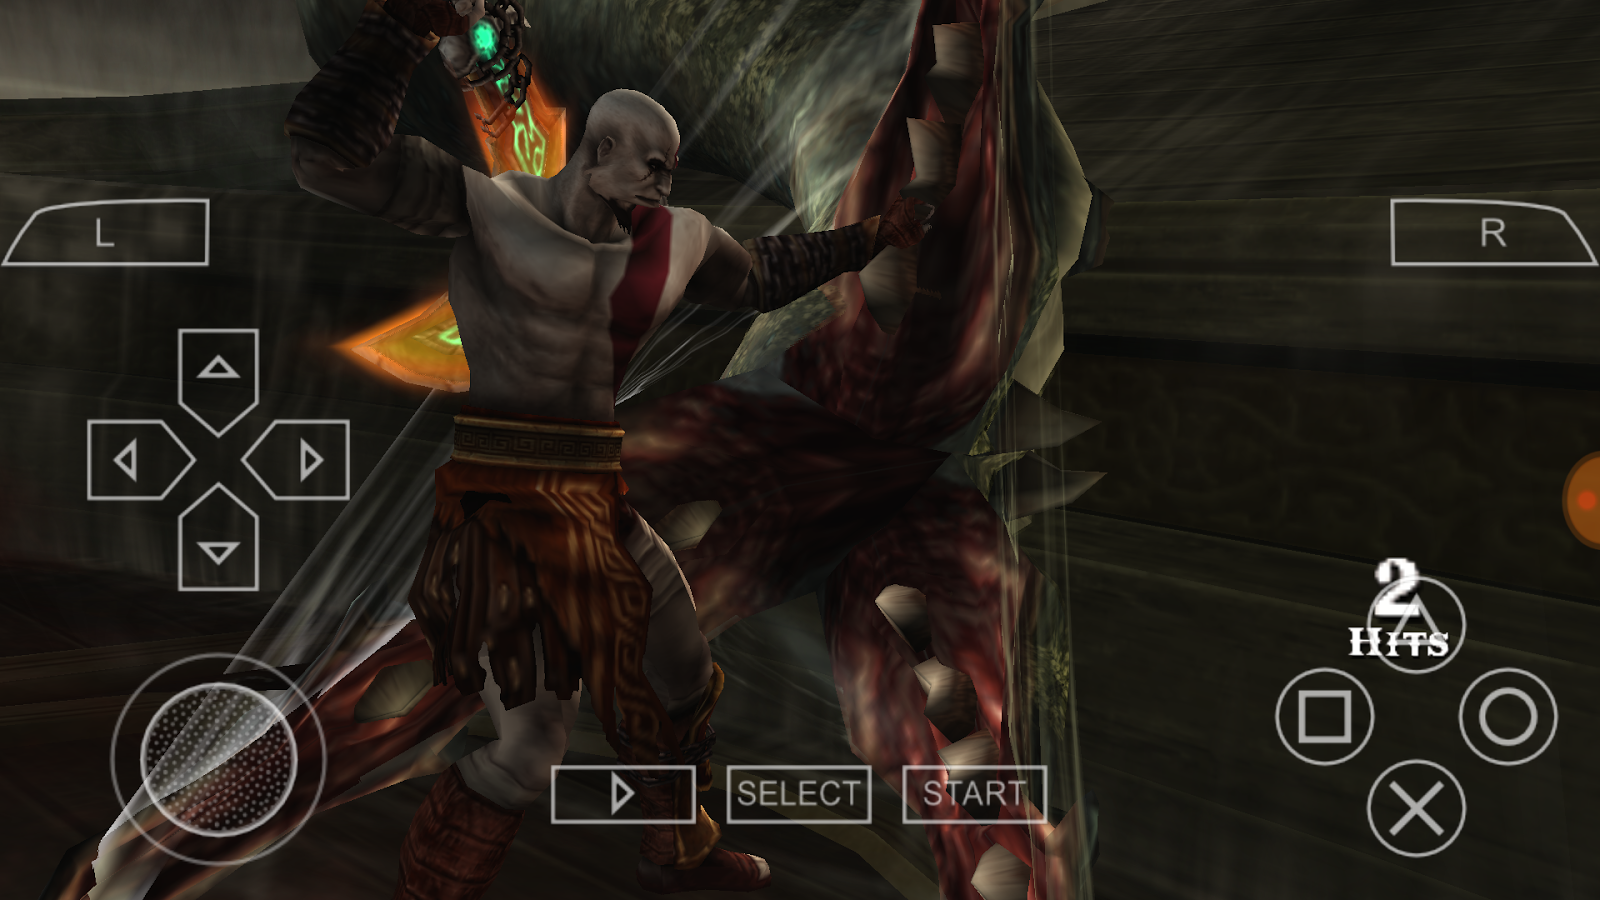 Download game ppsspp god of war ghost of sparta high compres cso